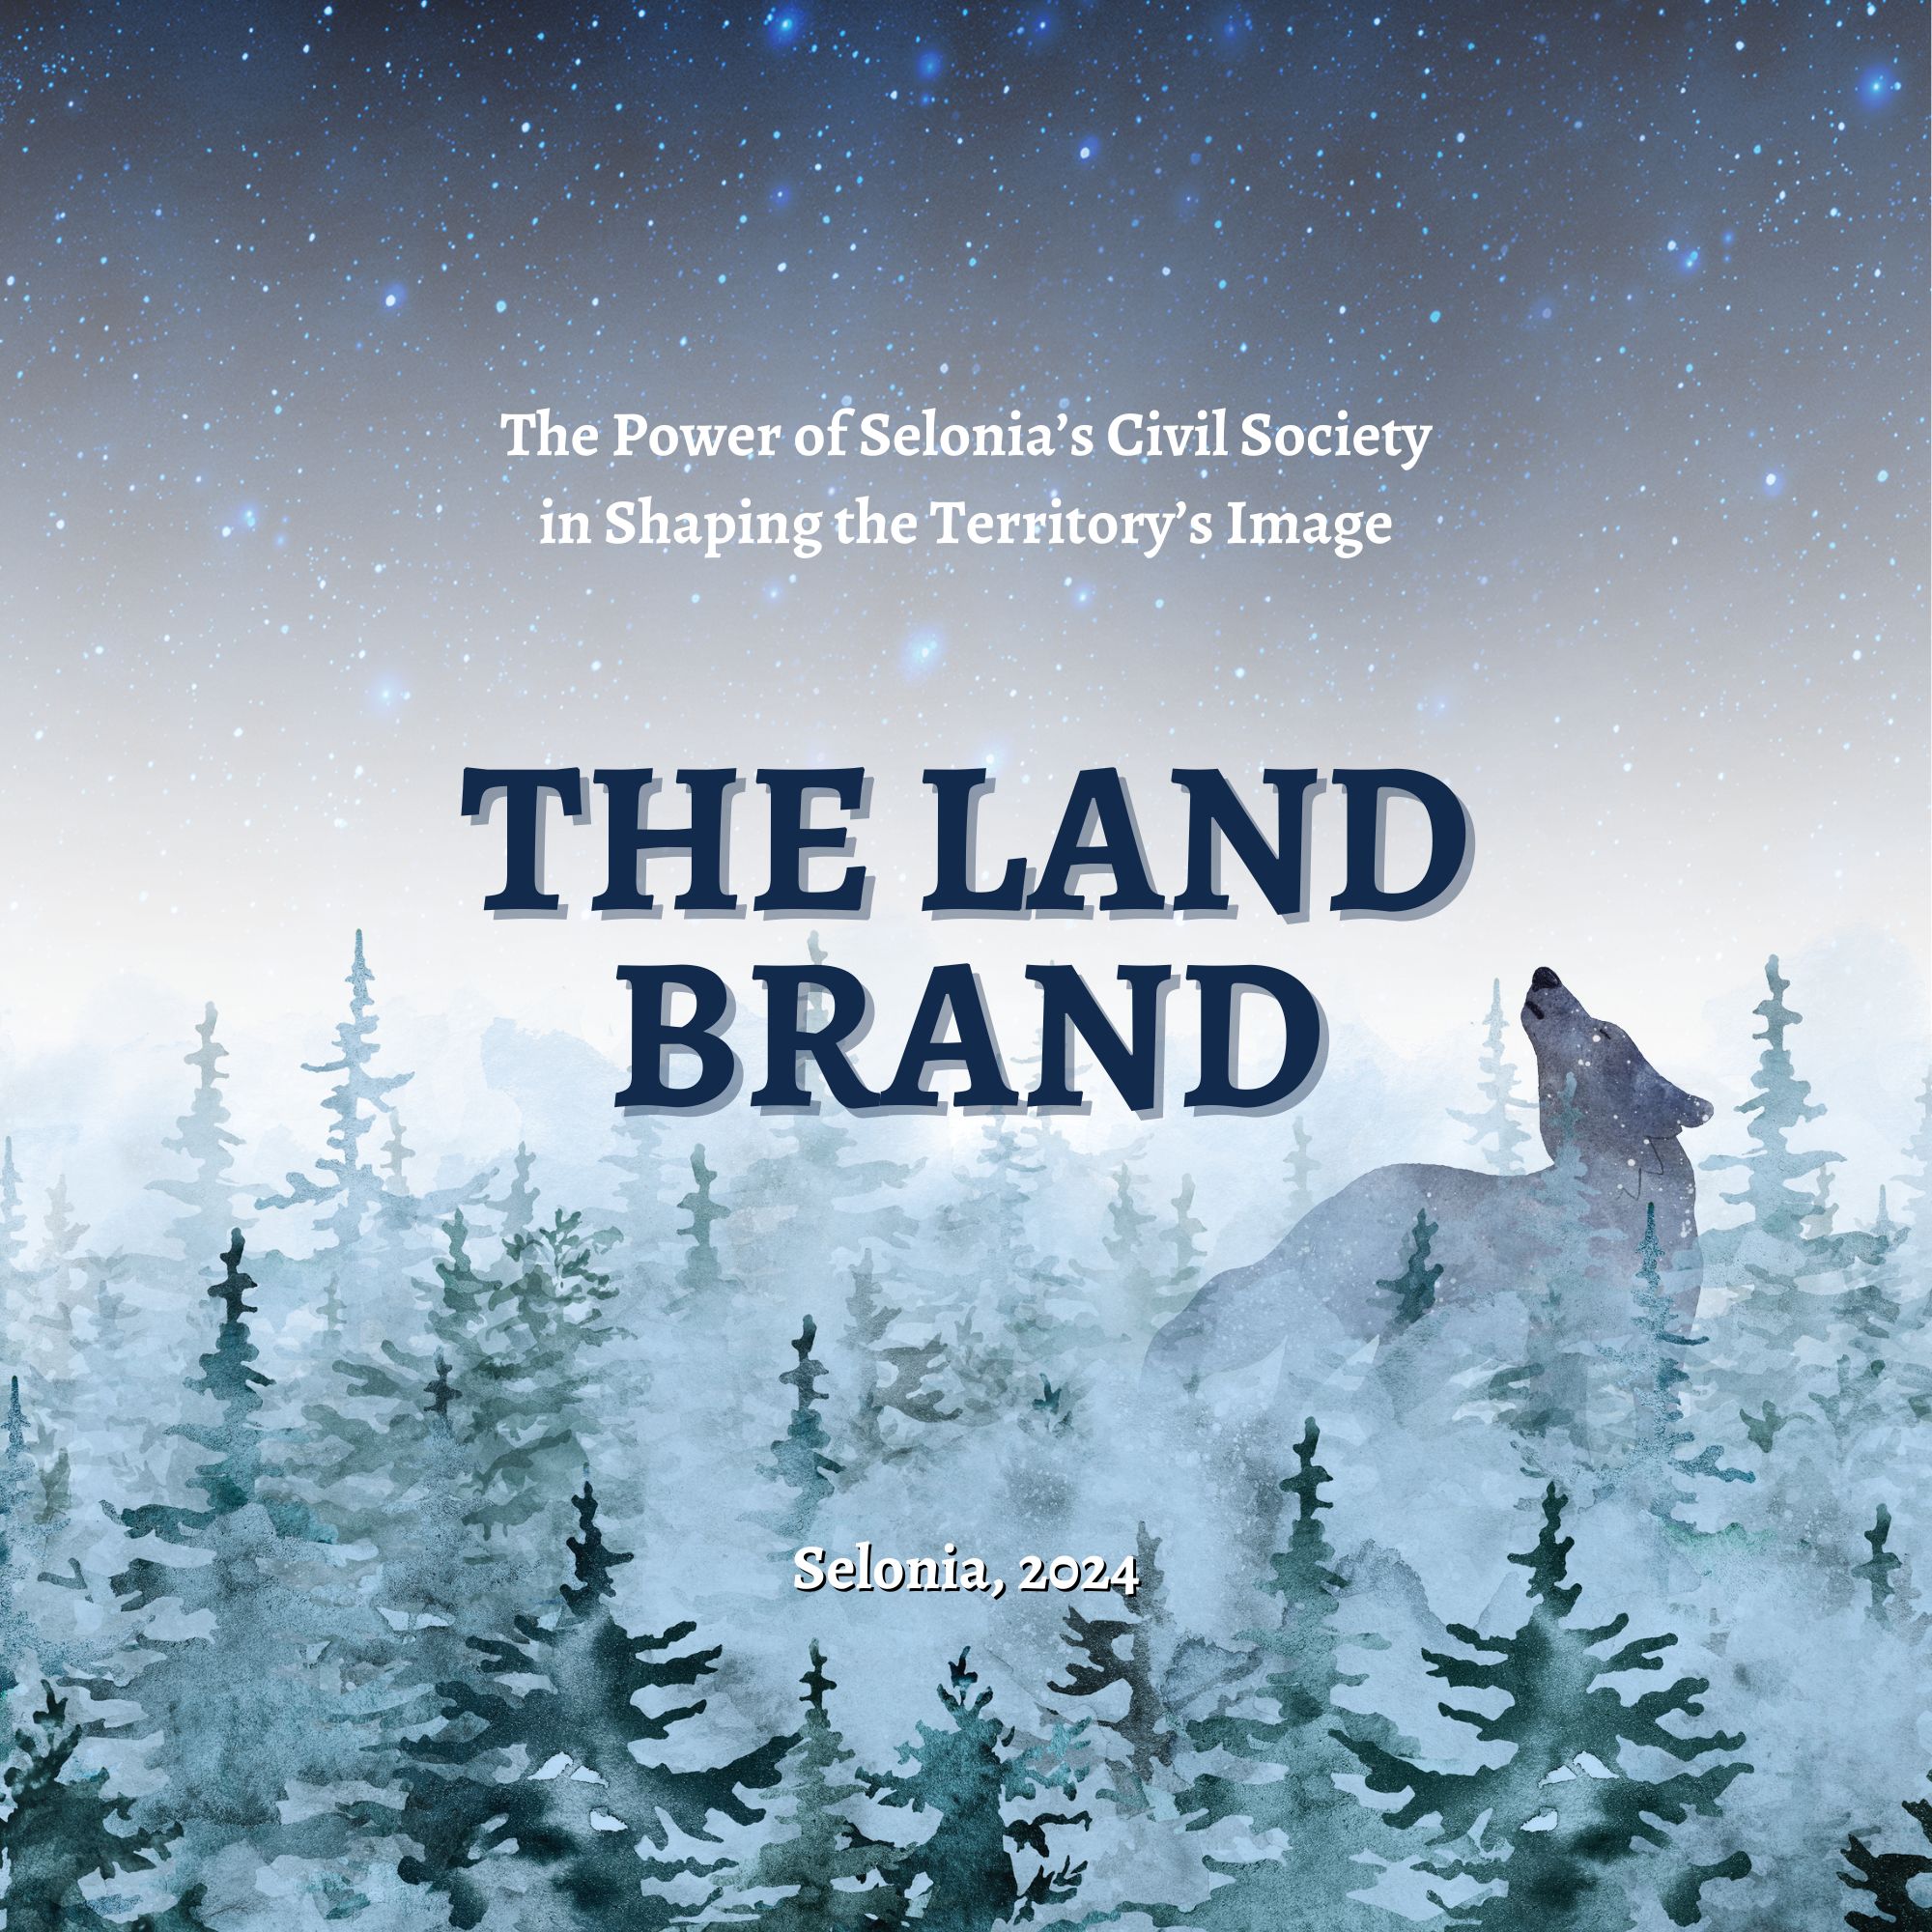 The Land Brand. The Power of Selonia’s Civil Society in Shaping the Territory’s Image.